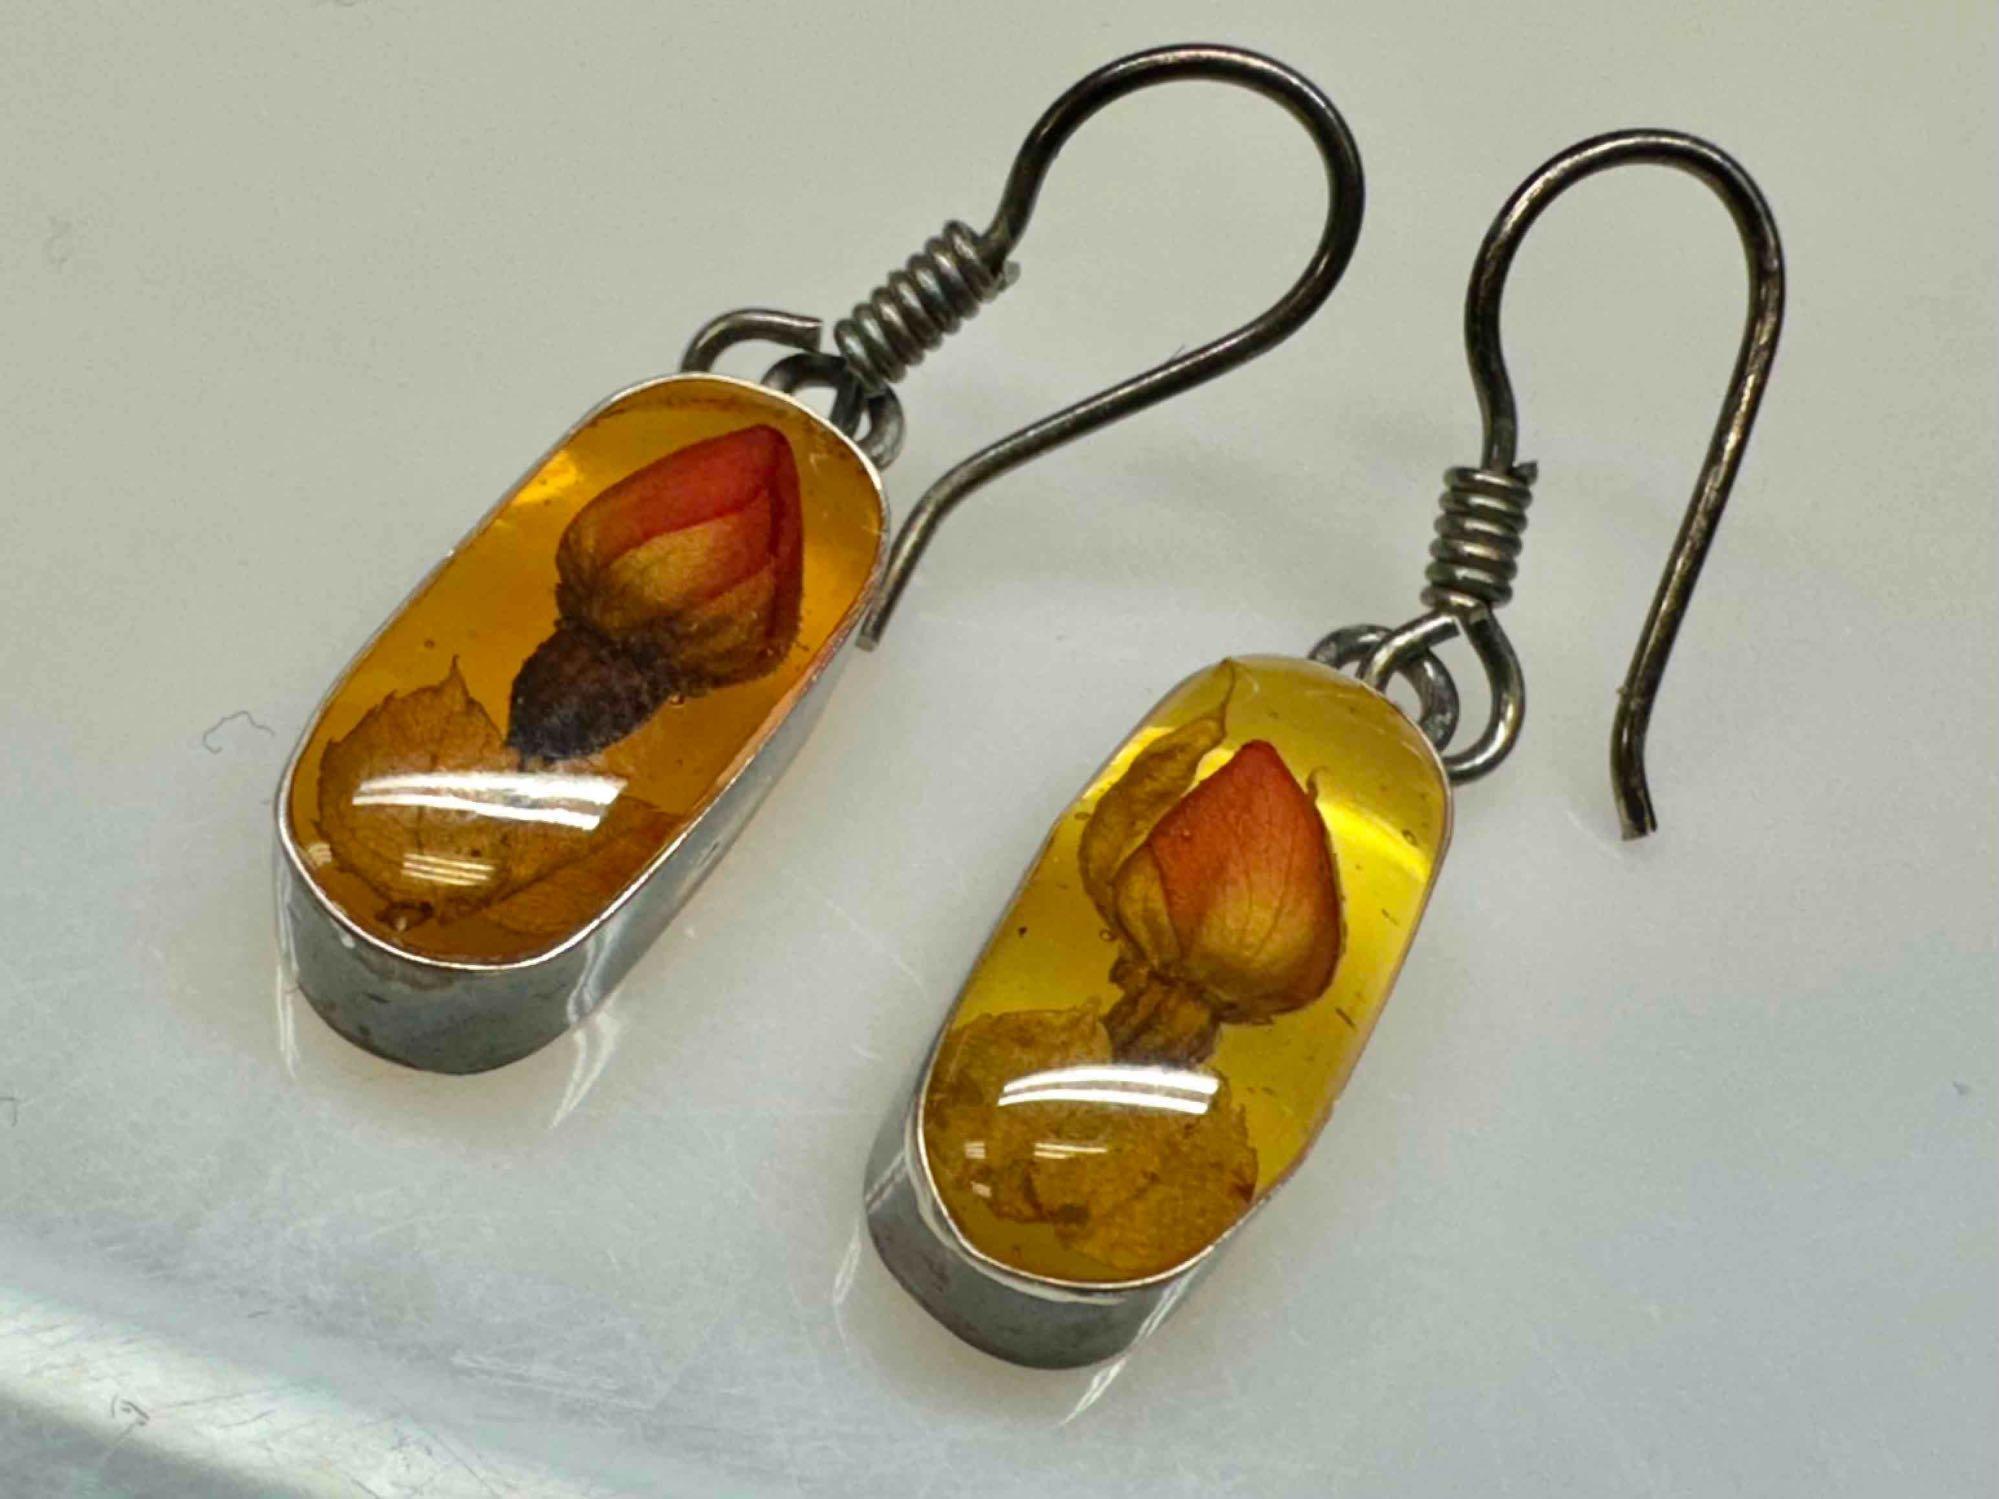 Unique 925 Sterling Silver Amber Earrings 3.3g